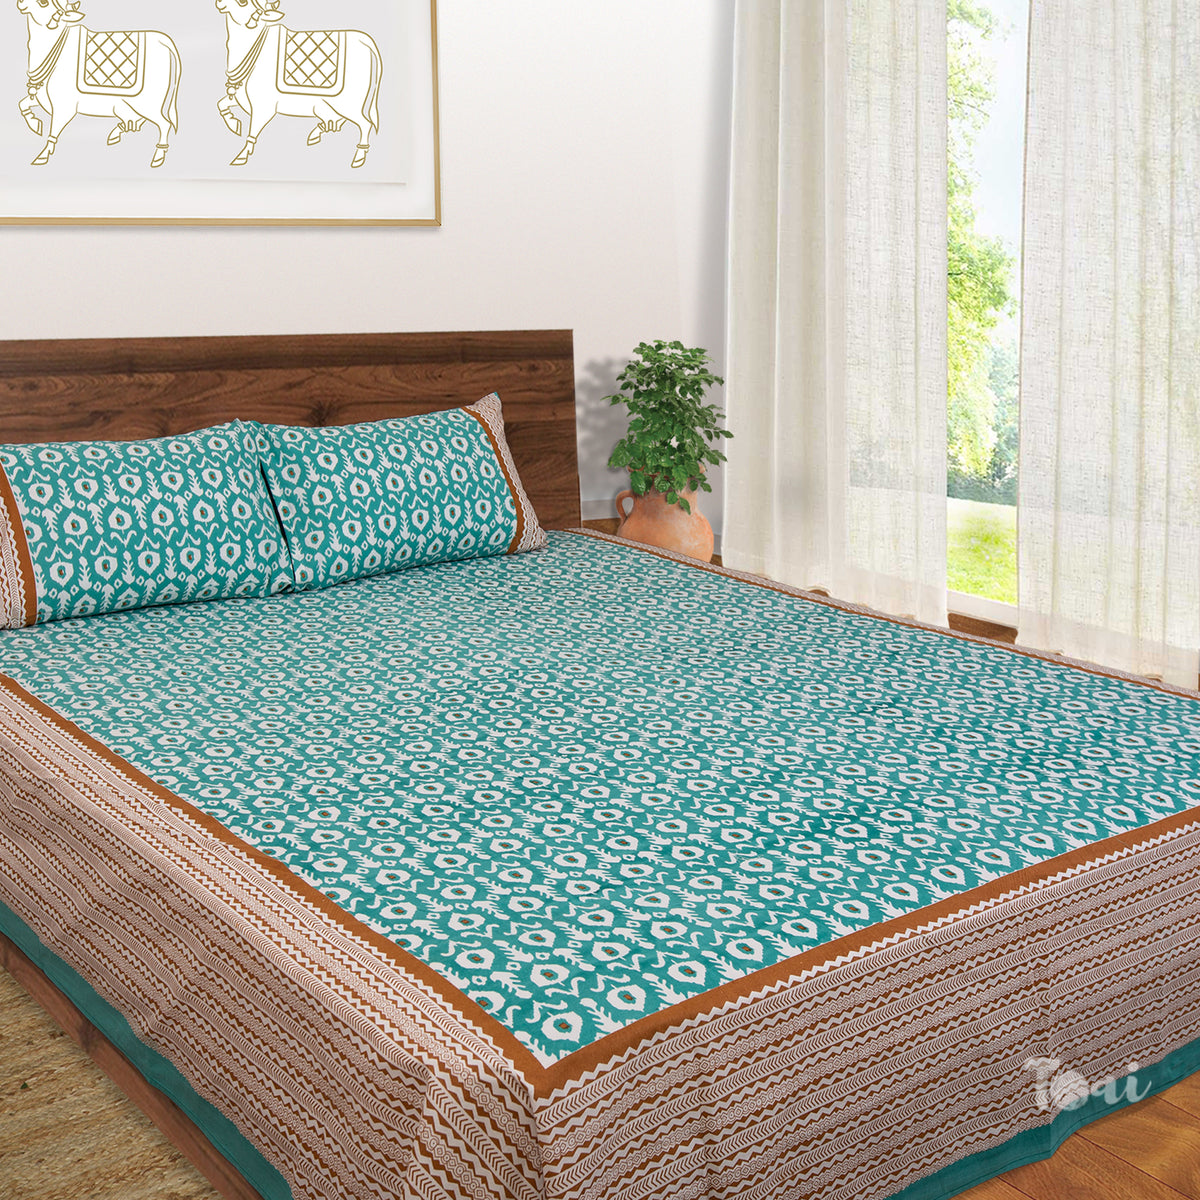 Green Ikat |hand screen printed bedsheet| Double bed ,Queen size | 250 TC Pure Cotton| Complementing pillow covers